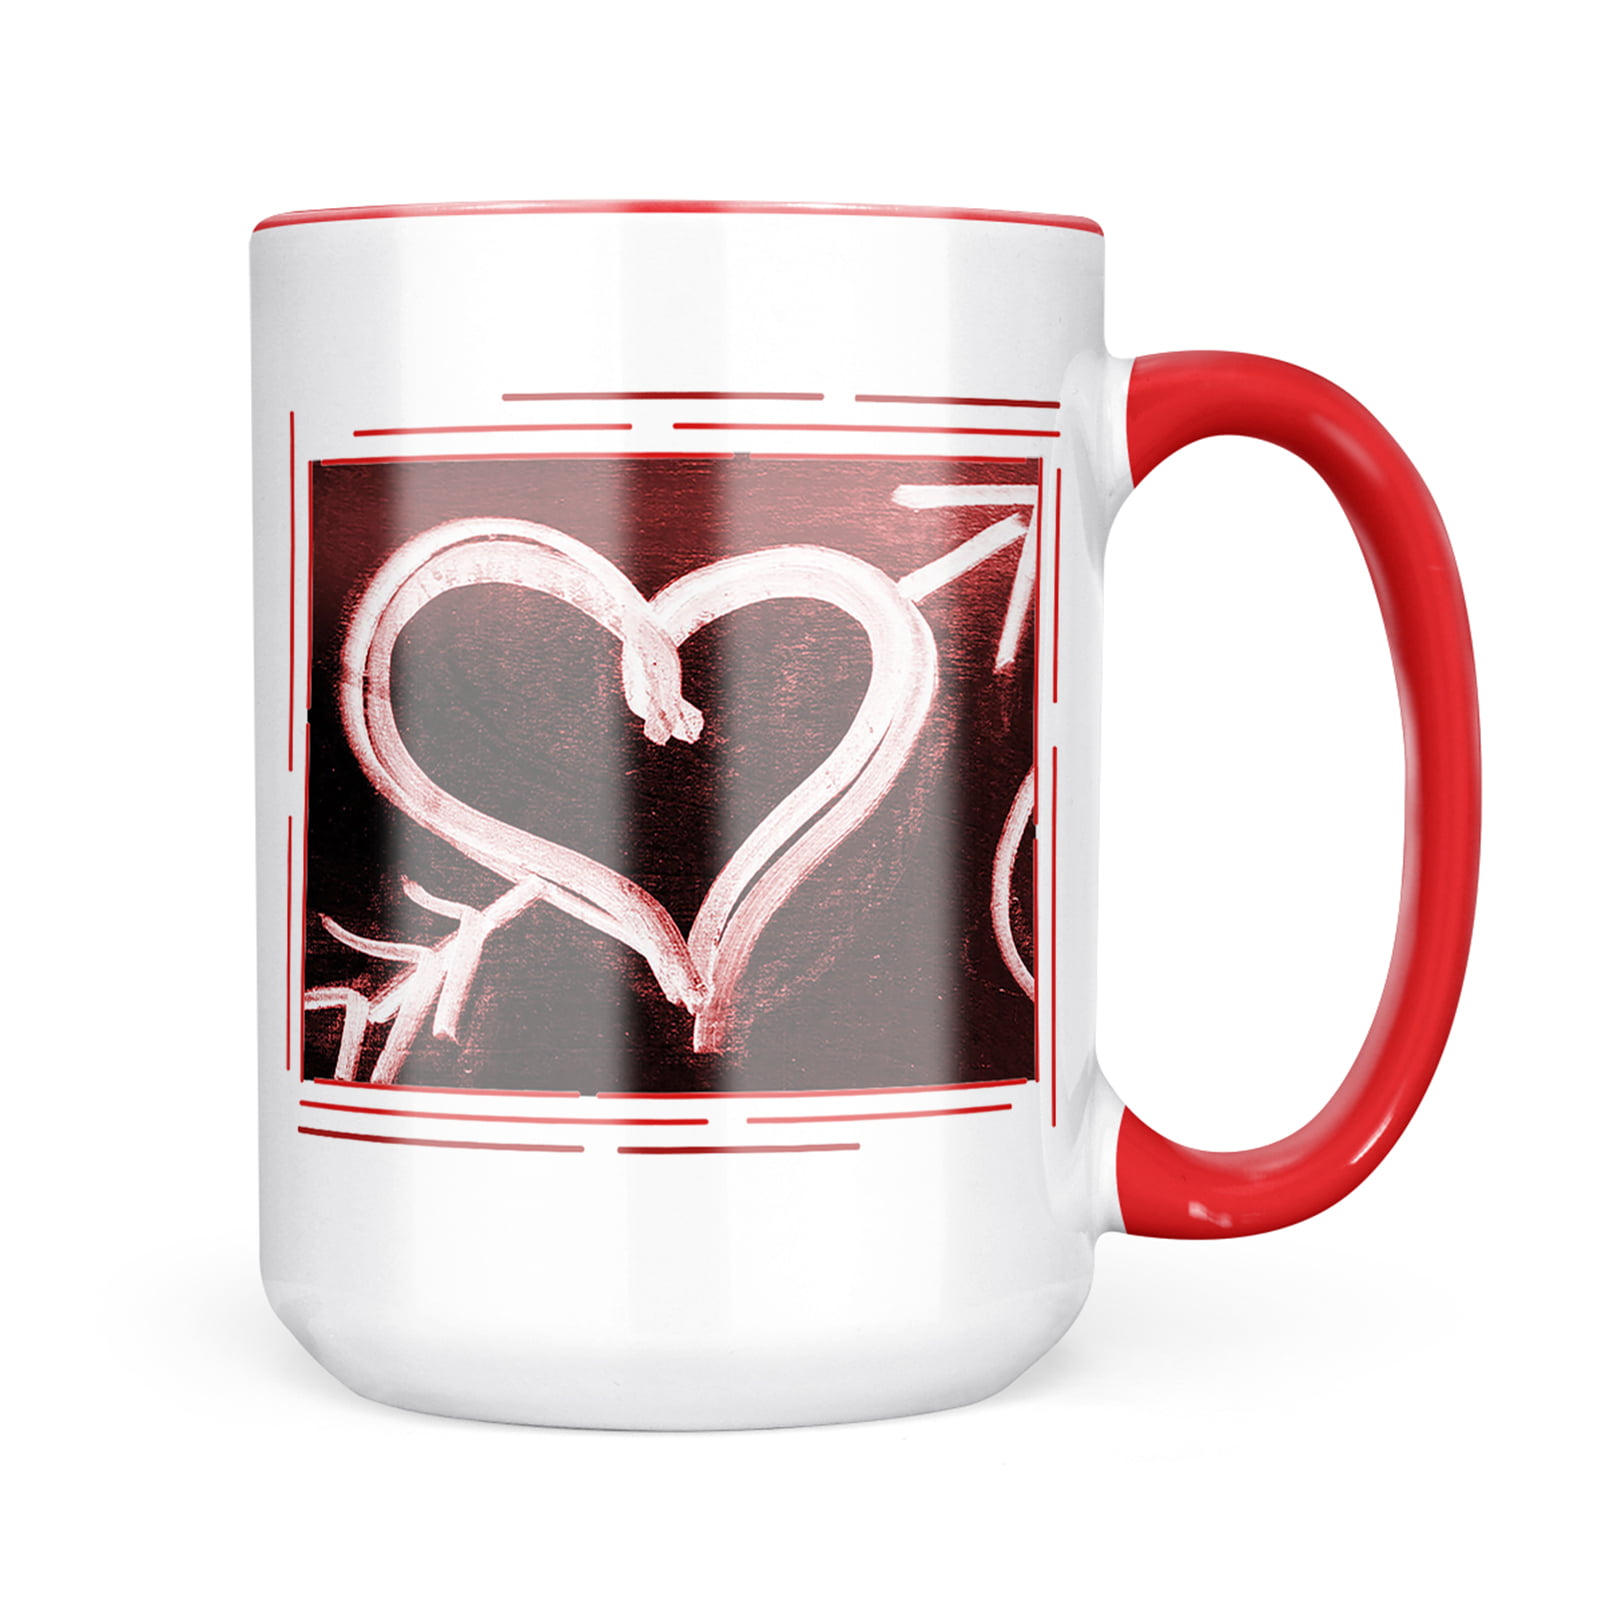 Heart Cup w/ Arrow Straw Red 16oz Party Decor Gift Box Novelty Birthday Favor 